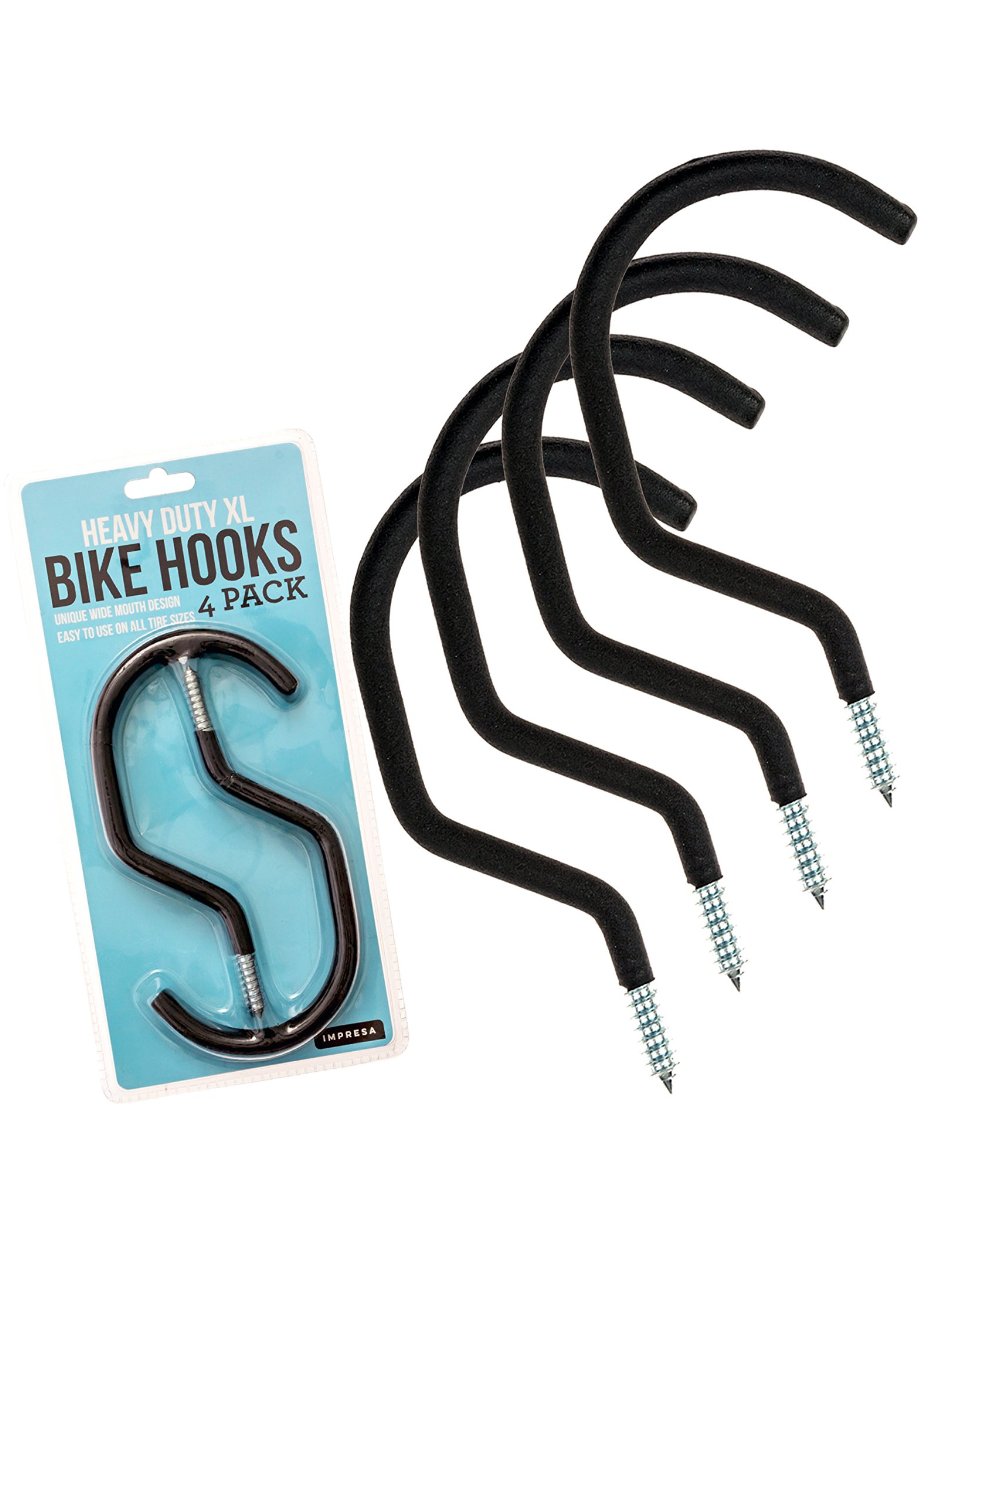 MCIGICM Heavy Duty Bike Hook: 4 Pack Small Size Perfect Hooks | Hangers for  Garage Ceiling and Wall Bicycle Storage and Hanging Screw in Bike Storage